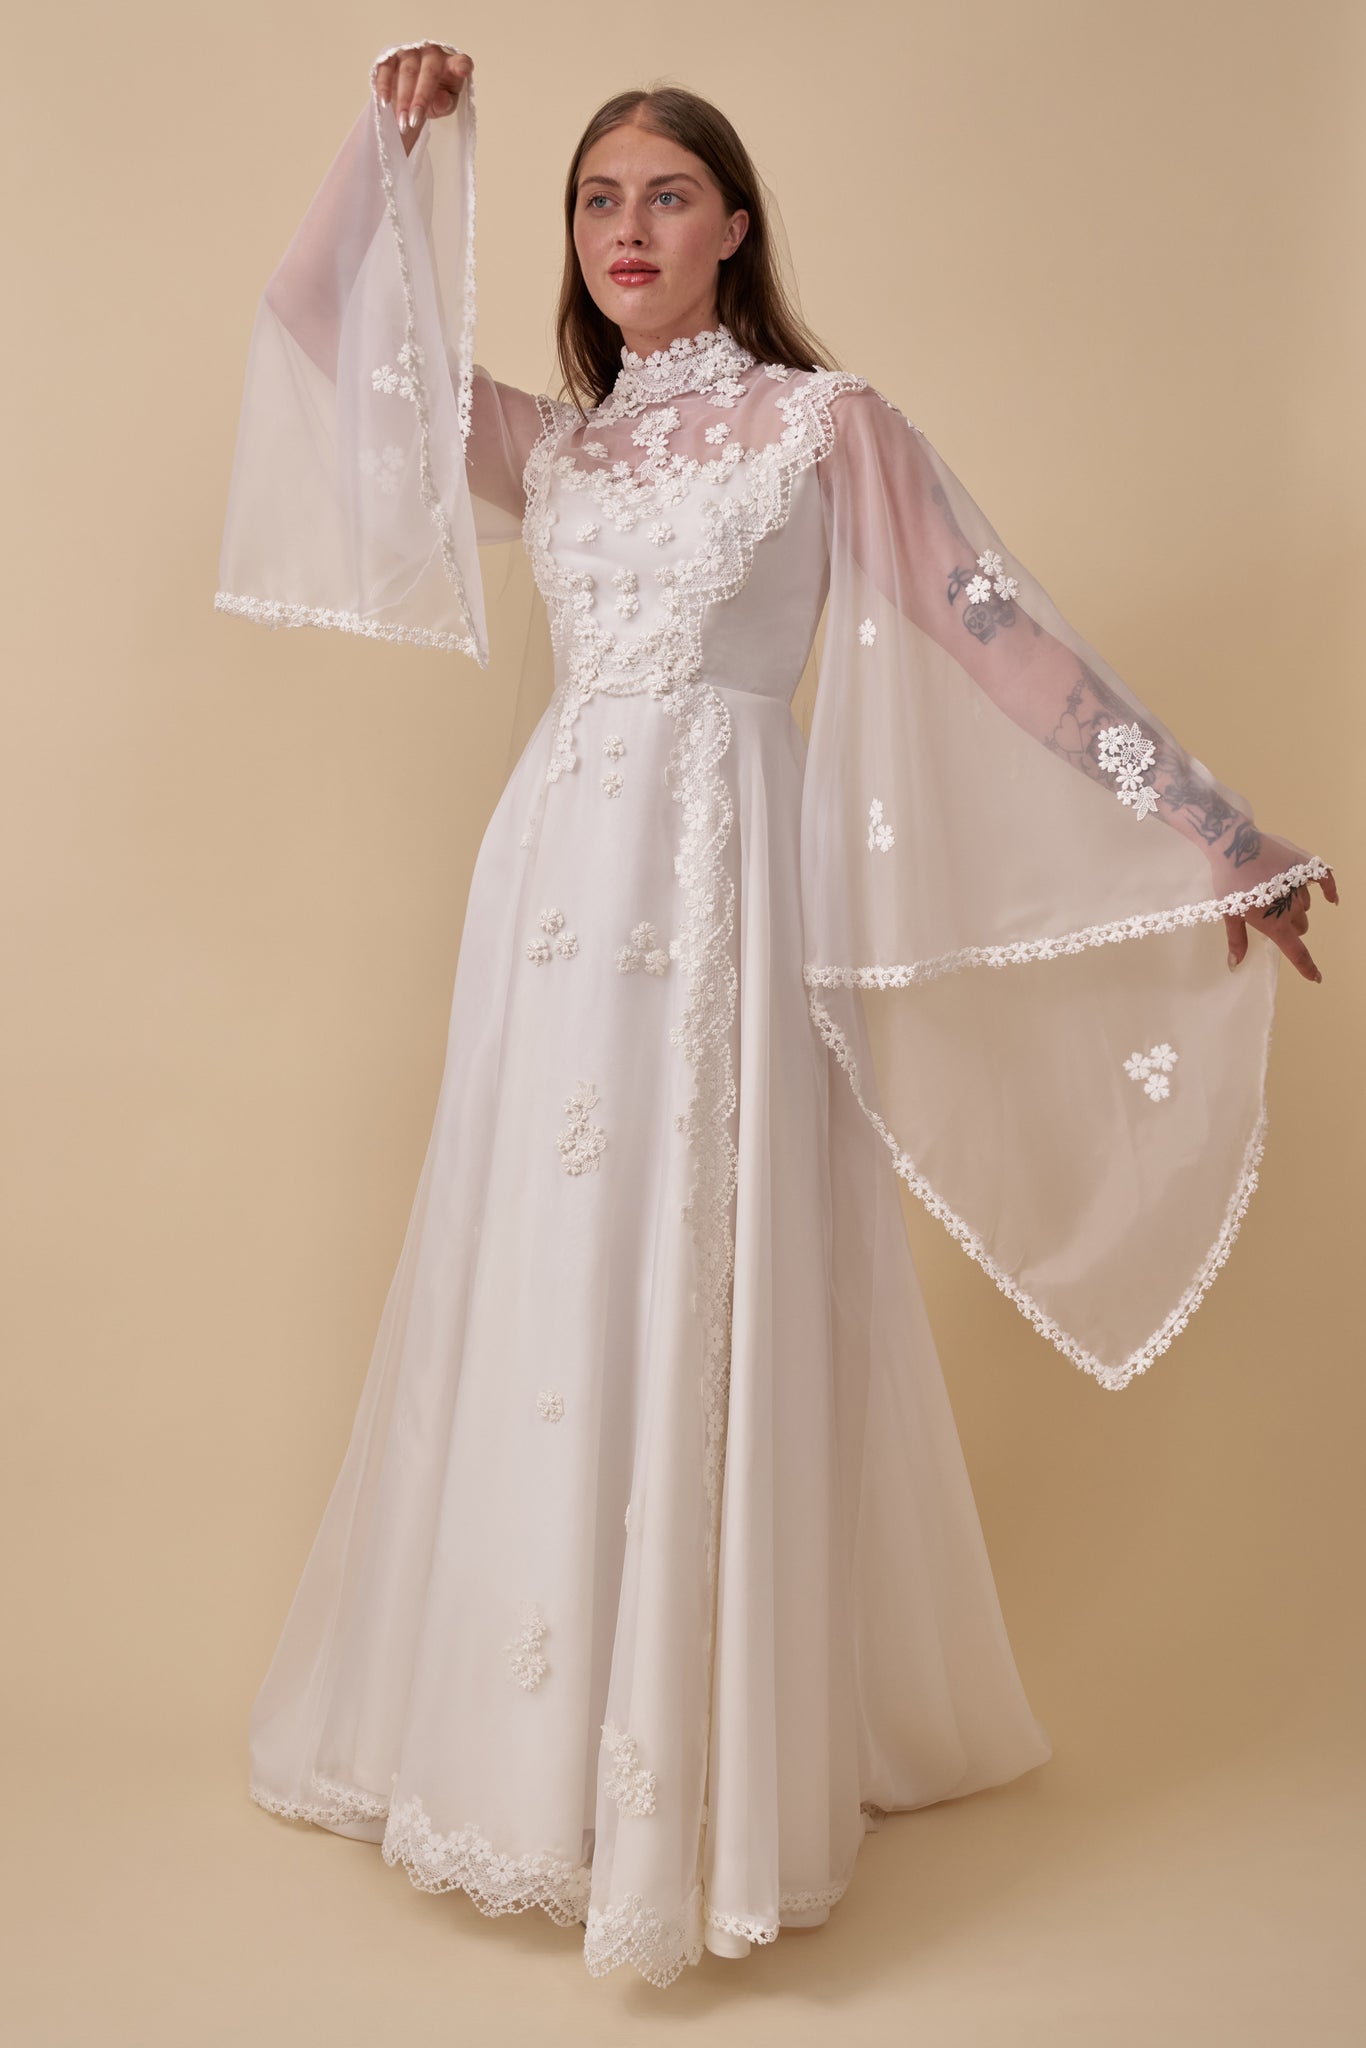 Diona Ethereal Gown - XS